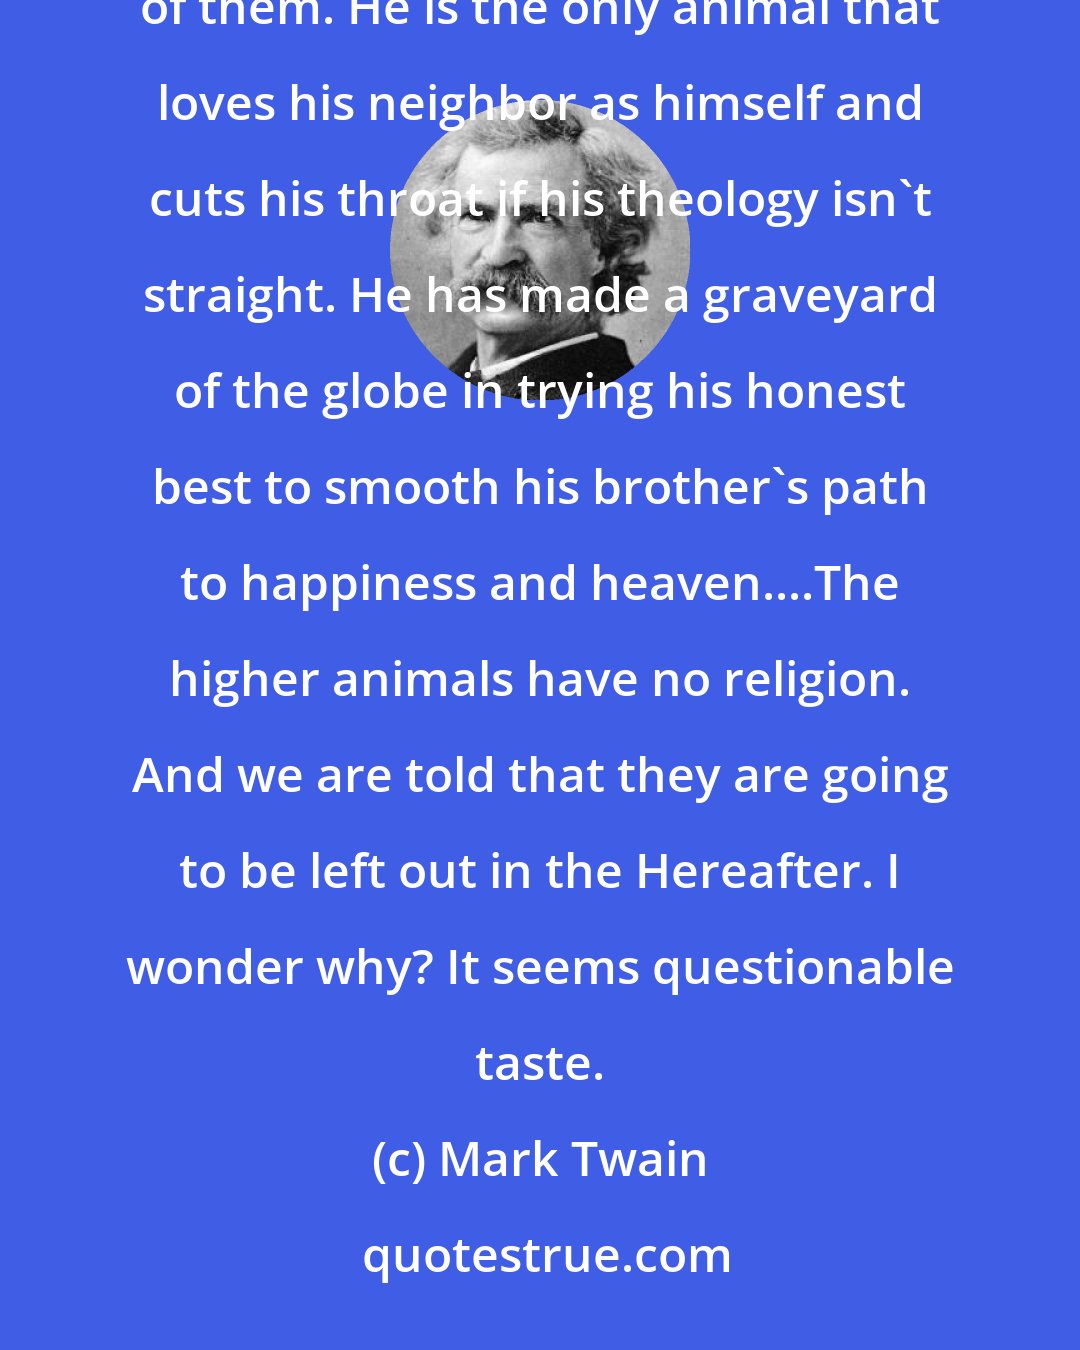 Mark Twain: Man is a Religious Animal. He is the only Religious Animal. He is the only animal that has the True Religion--several of them. He is the only animal that loves his neighbor as himself and cuts his throat if his theology isn't straight. He has made a graveyard of the globe in trying his honest best to smooth his brother's path to happiness and heaven....The higher animals have no religion. And we are told that they are going to be left out in the Hereafter. I wonder why? It seems questionable taste.